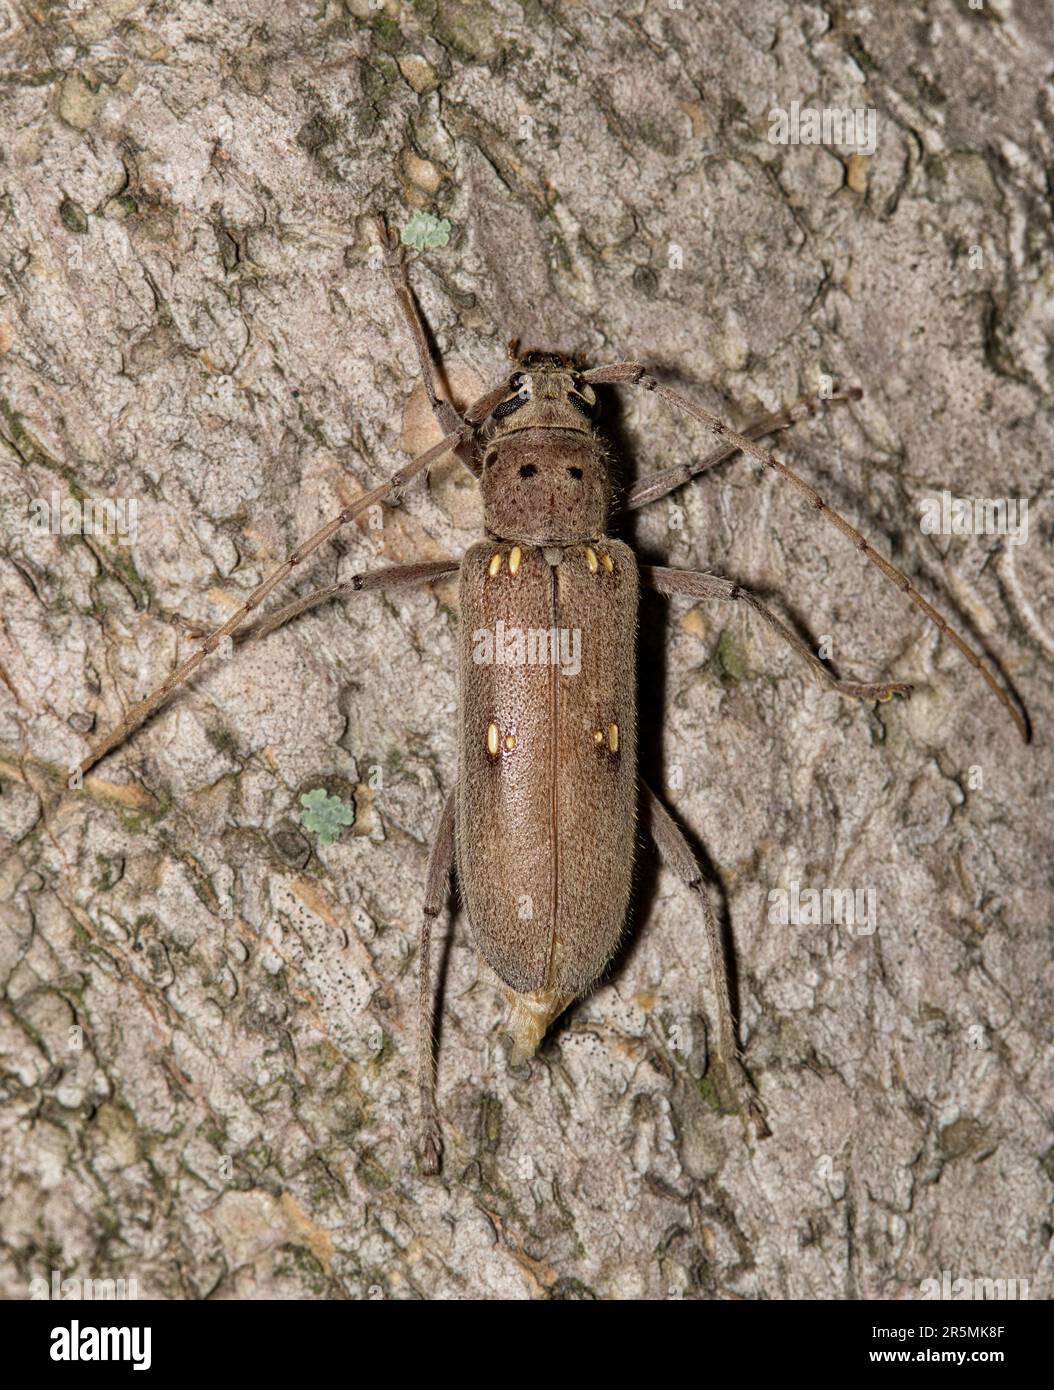 Lesser Ivory-marked Beetle (Eburia mutica) on a tree in Houston, TX dorsal view. Wood-boring beetle found in the Southern USA states. Stock Photo